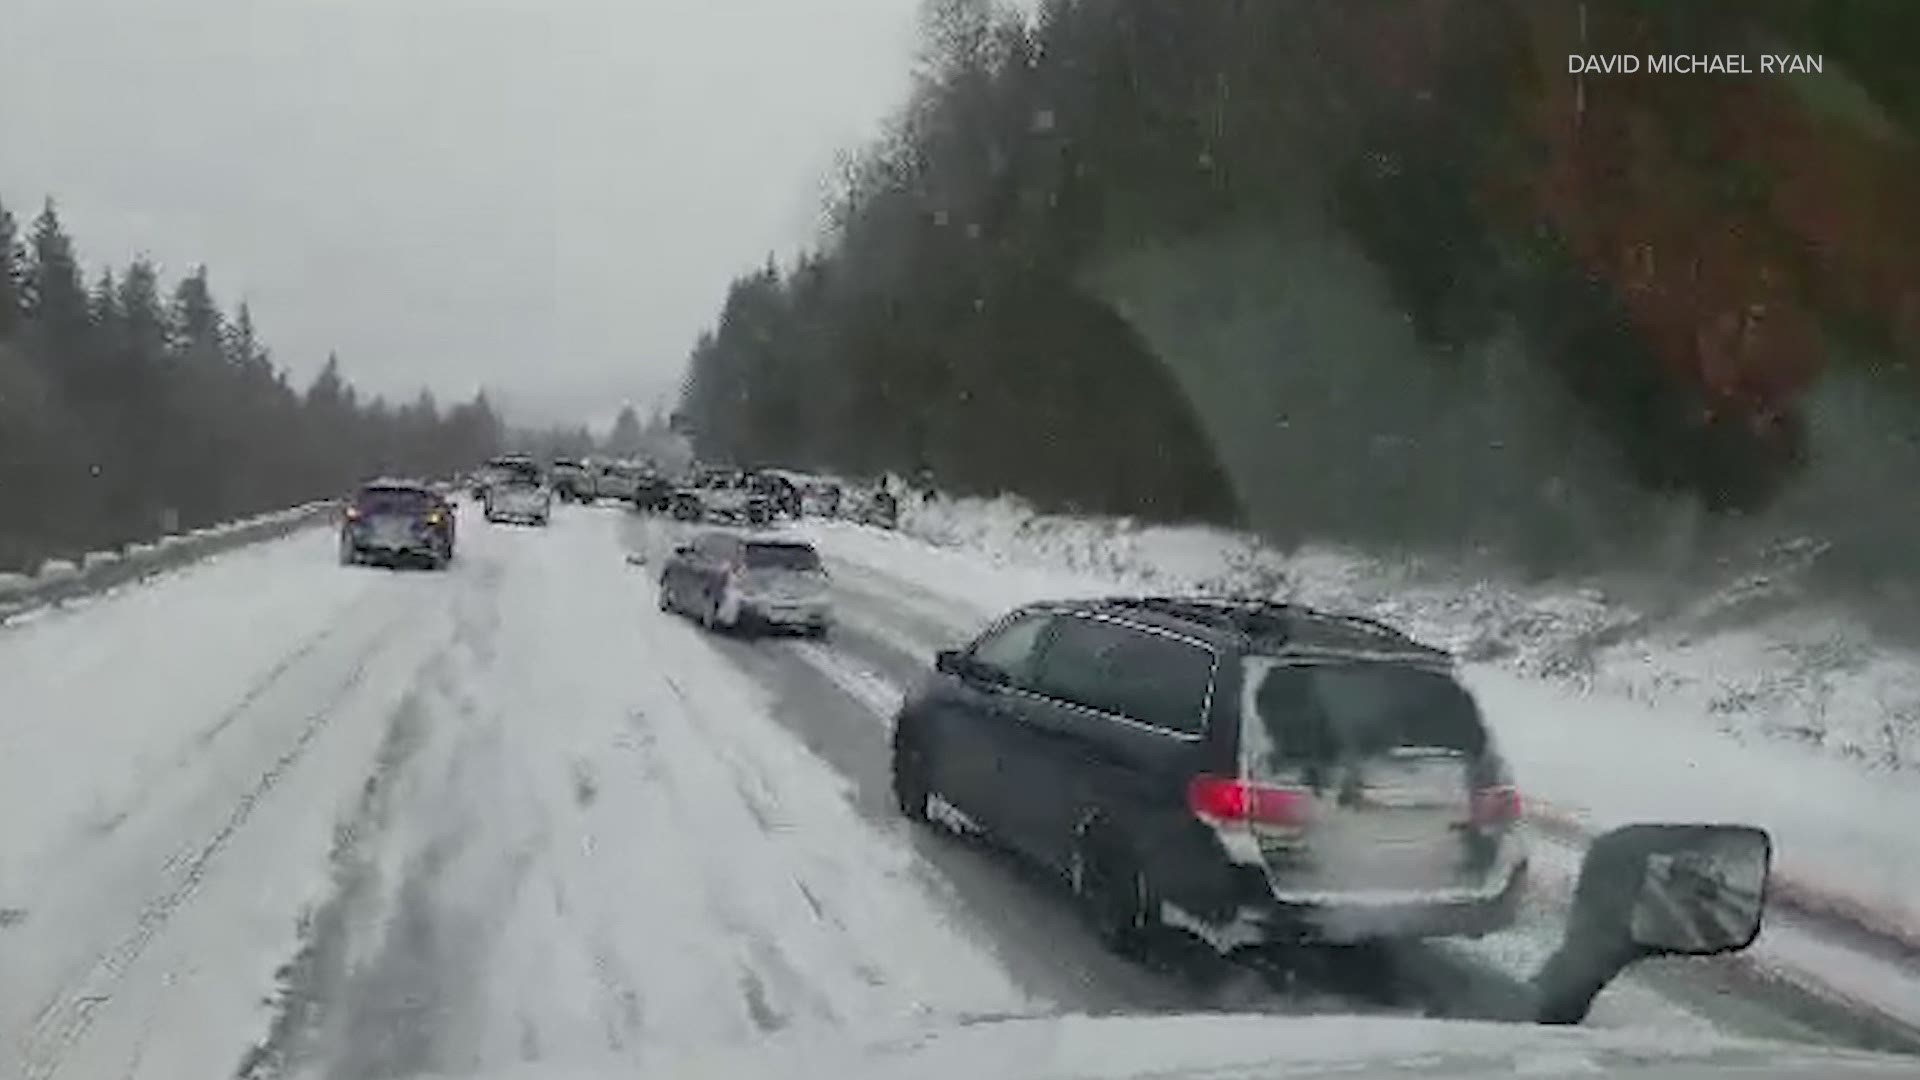 Westbound I-90 was shut down near North Bend following 15 collisions, including 3 rollovers, on Feb. 13.